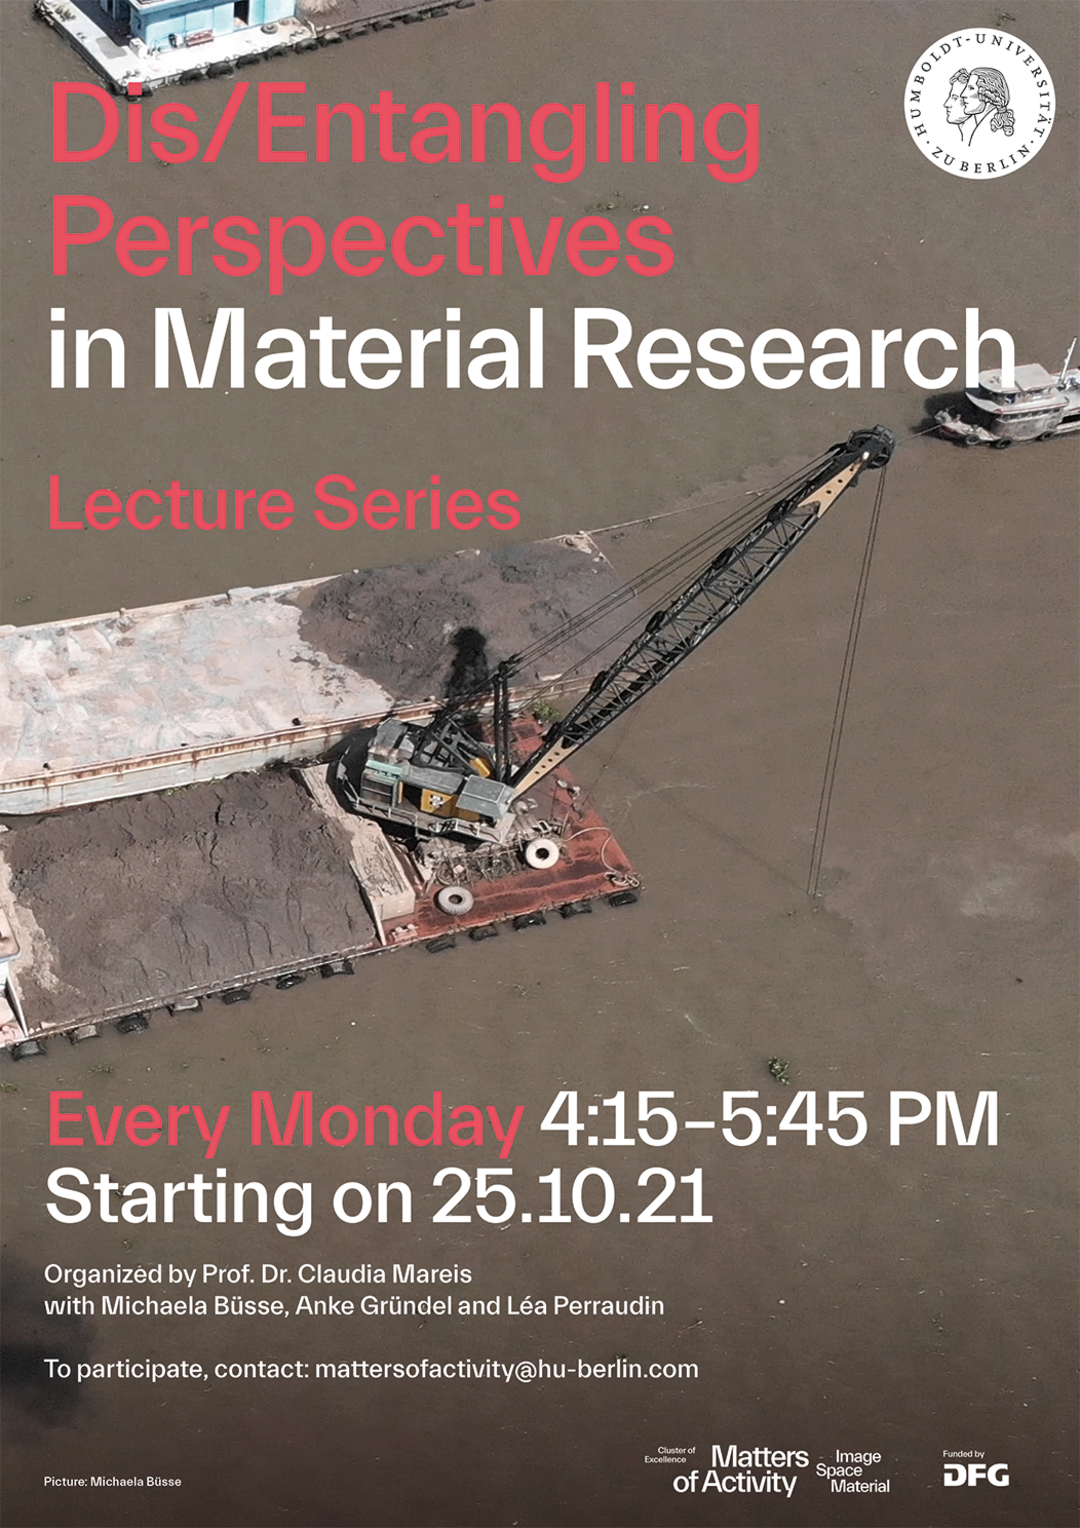 Poster »Dis/Entangling Perspectives in Material Research«. Copyright: Matters of Activity | Image: Michaela Büsse
